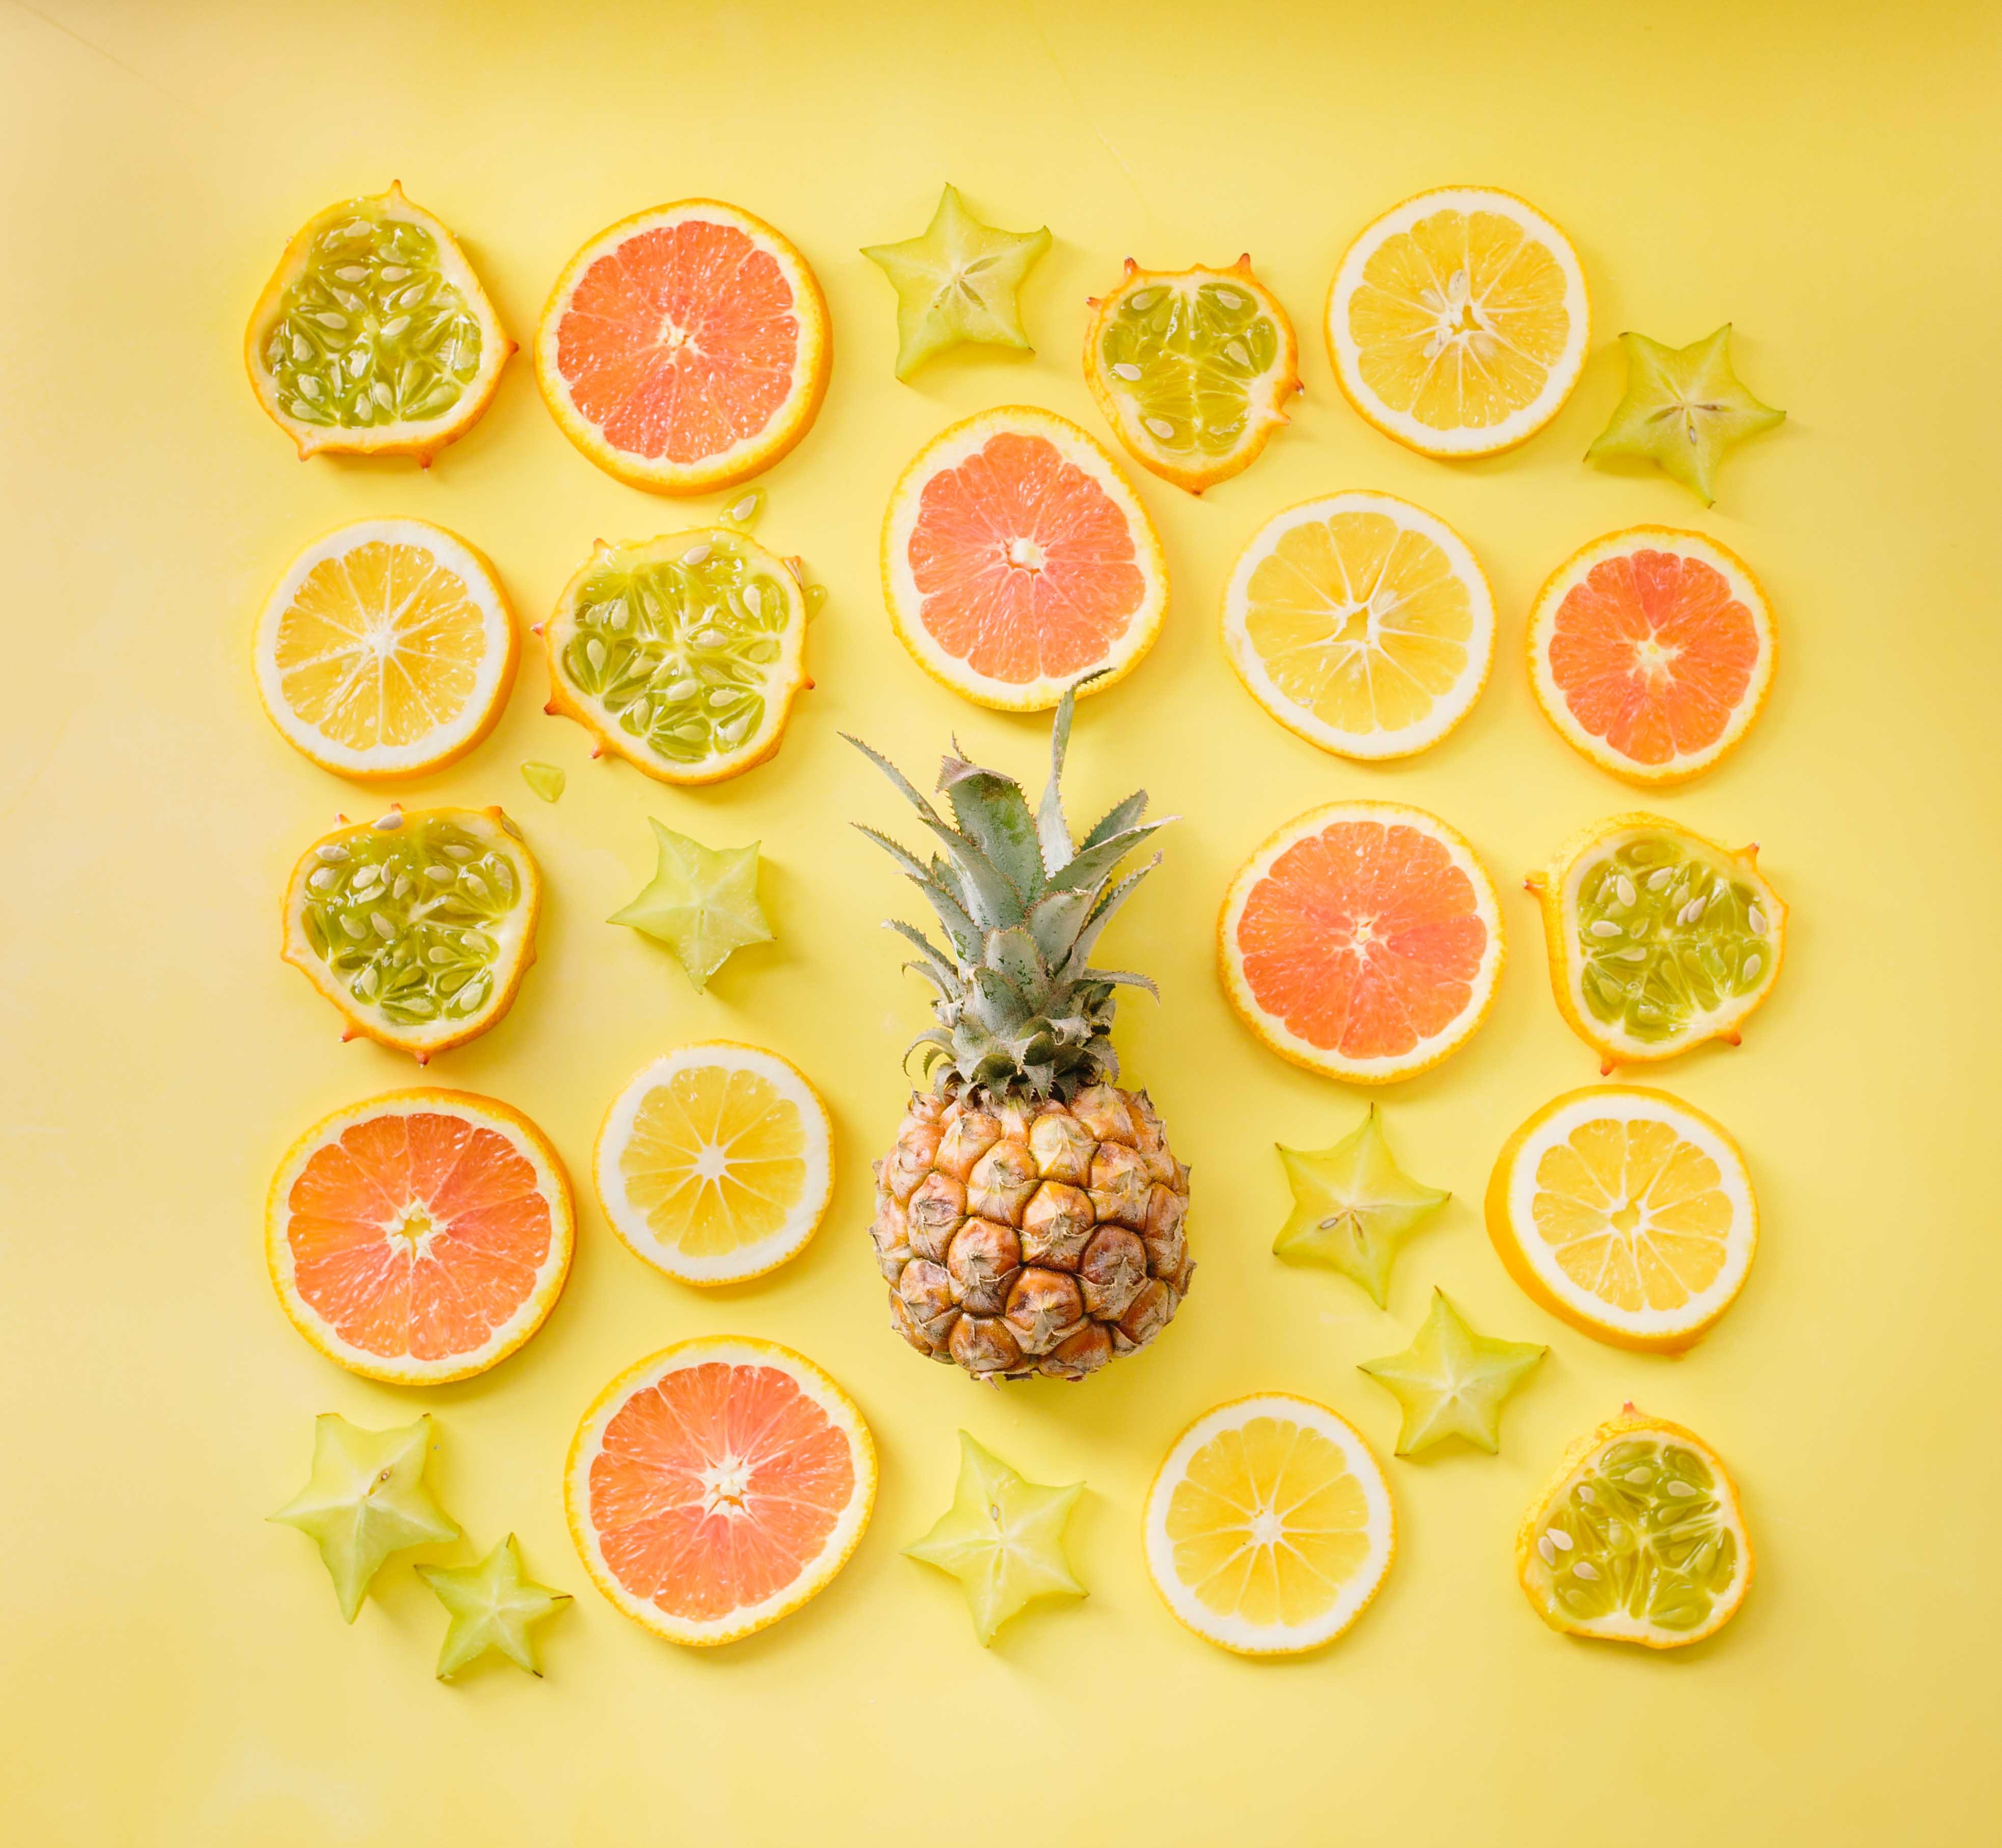 Pineapple Images with slices